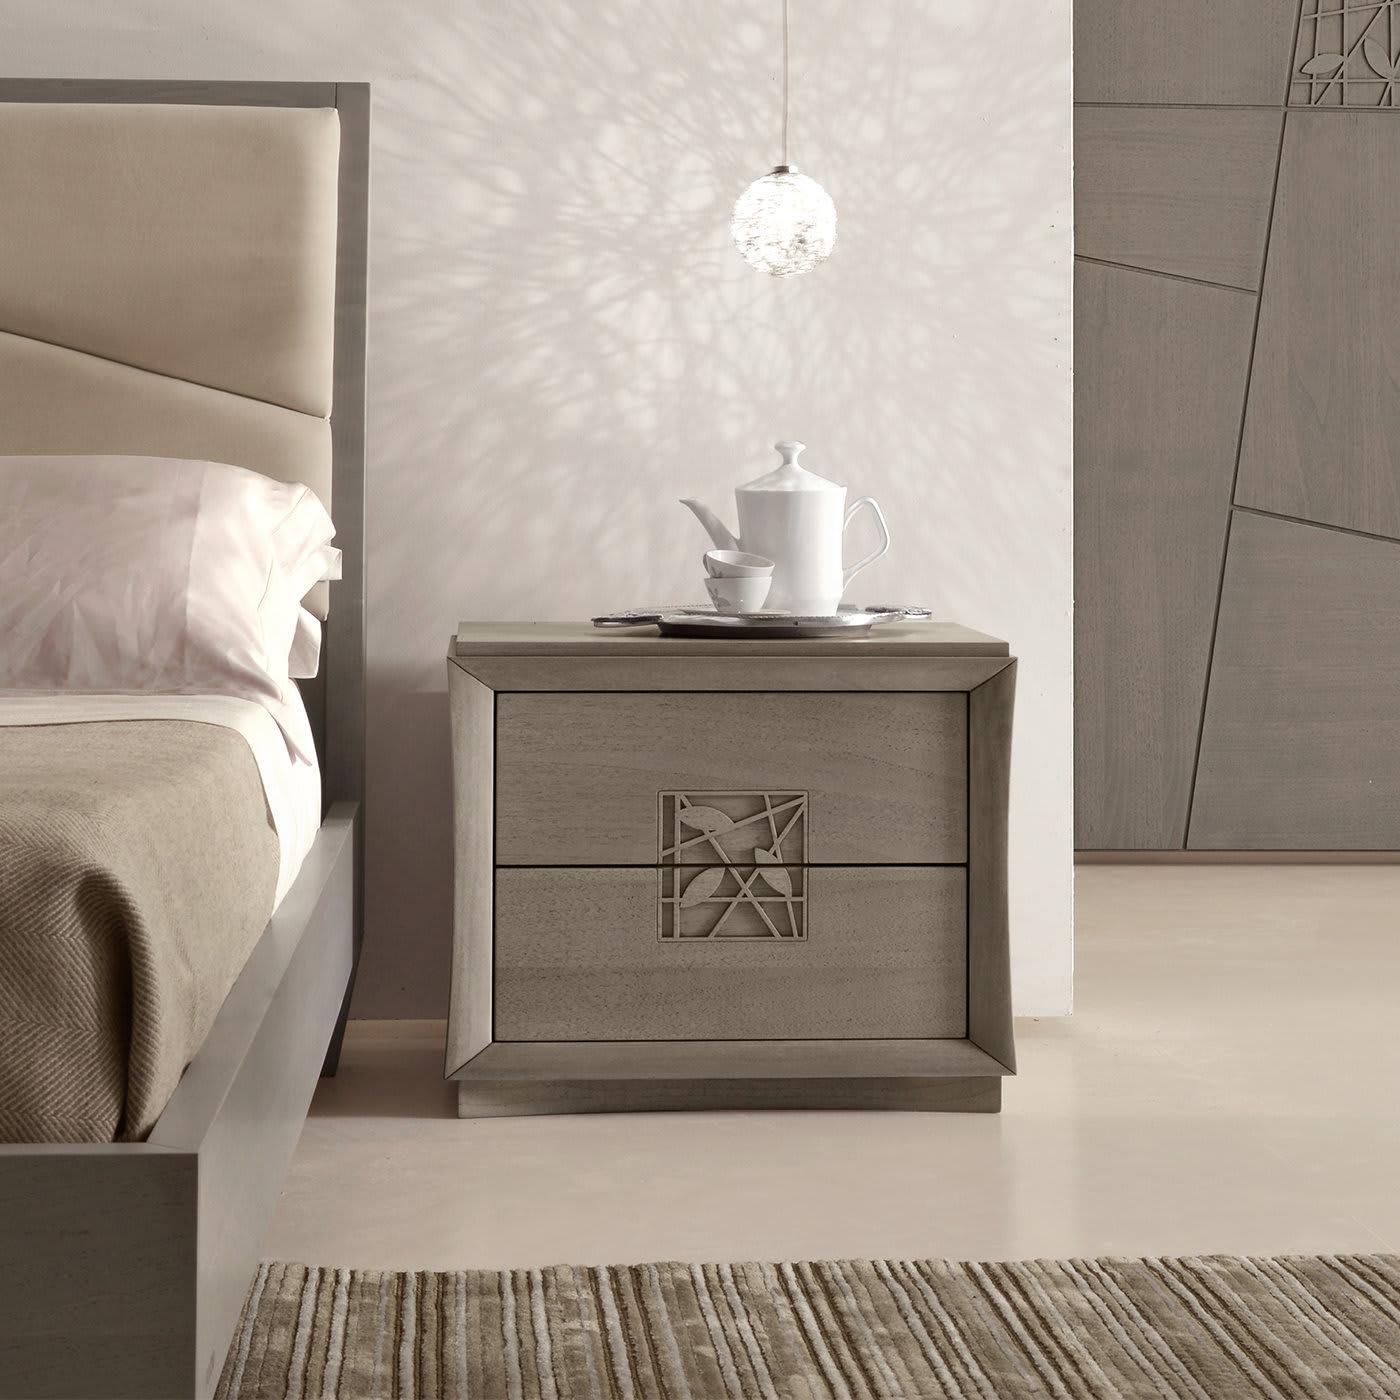 Designed to complement the Decor Bed, the Decor Nightstand features a leaf design in its two front drawers, lending it an original and sophisticated touch. Handleless for a smooth look, the drawers open with a push mechanism. The nightstand is